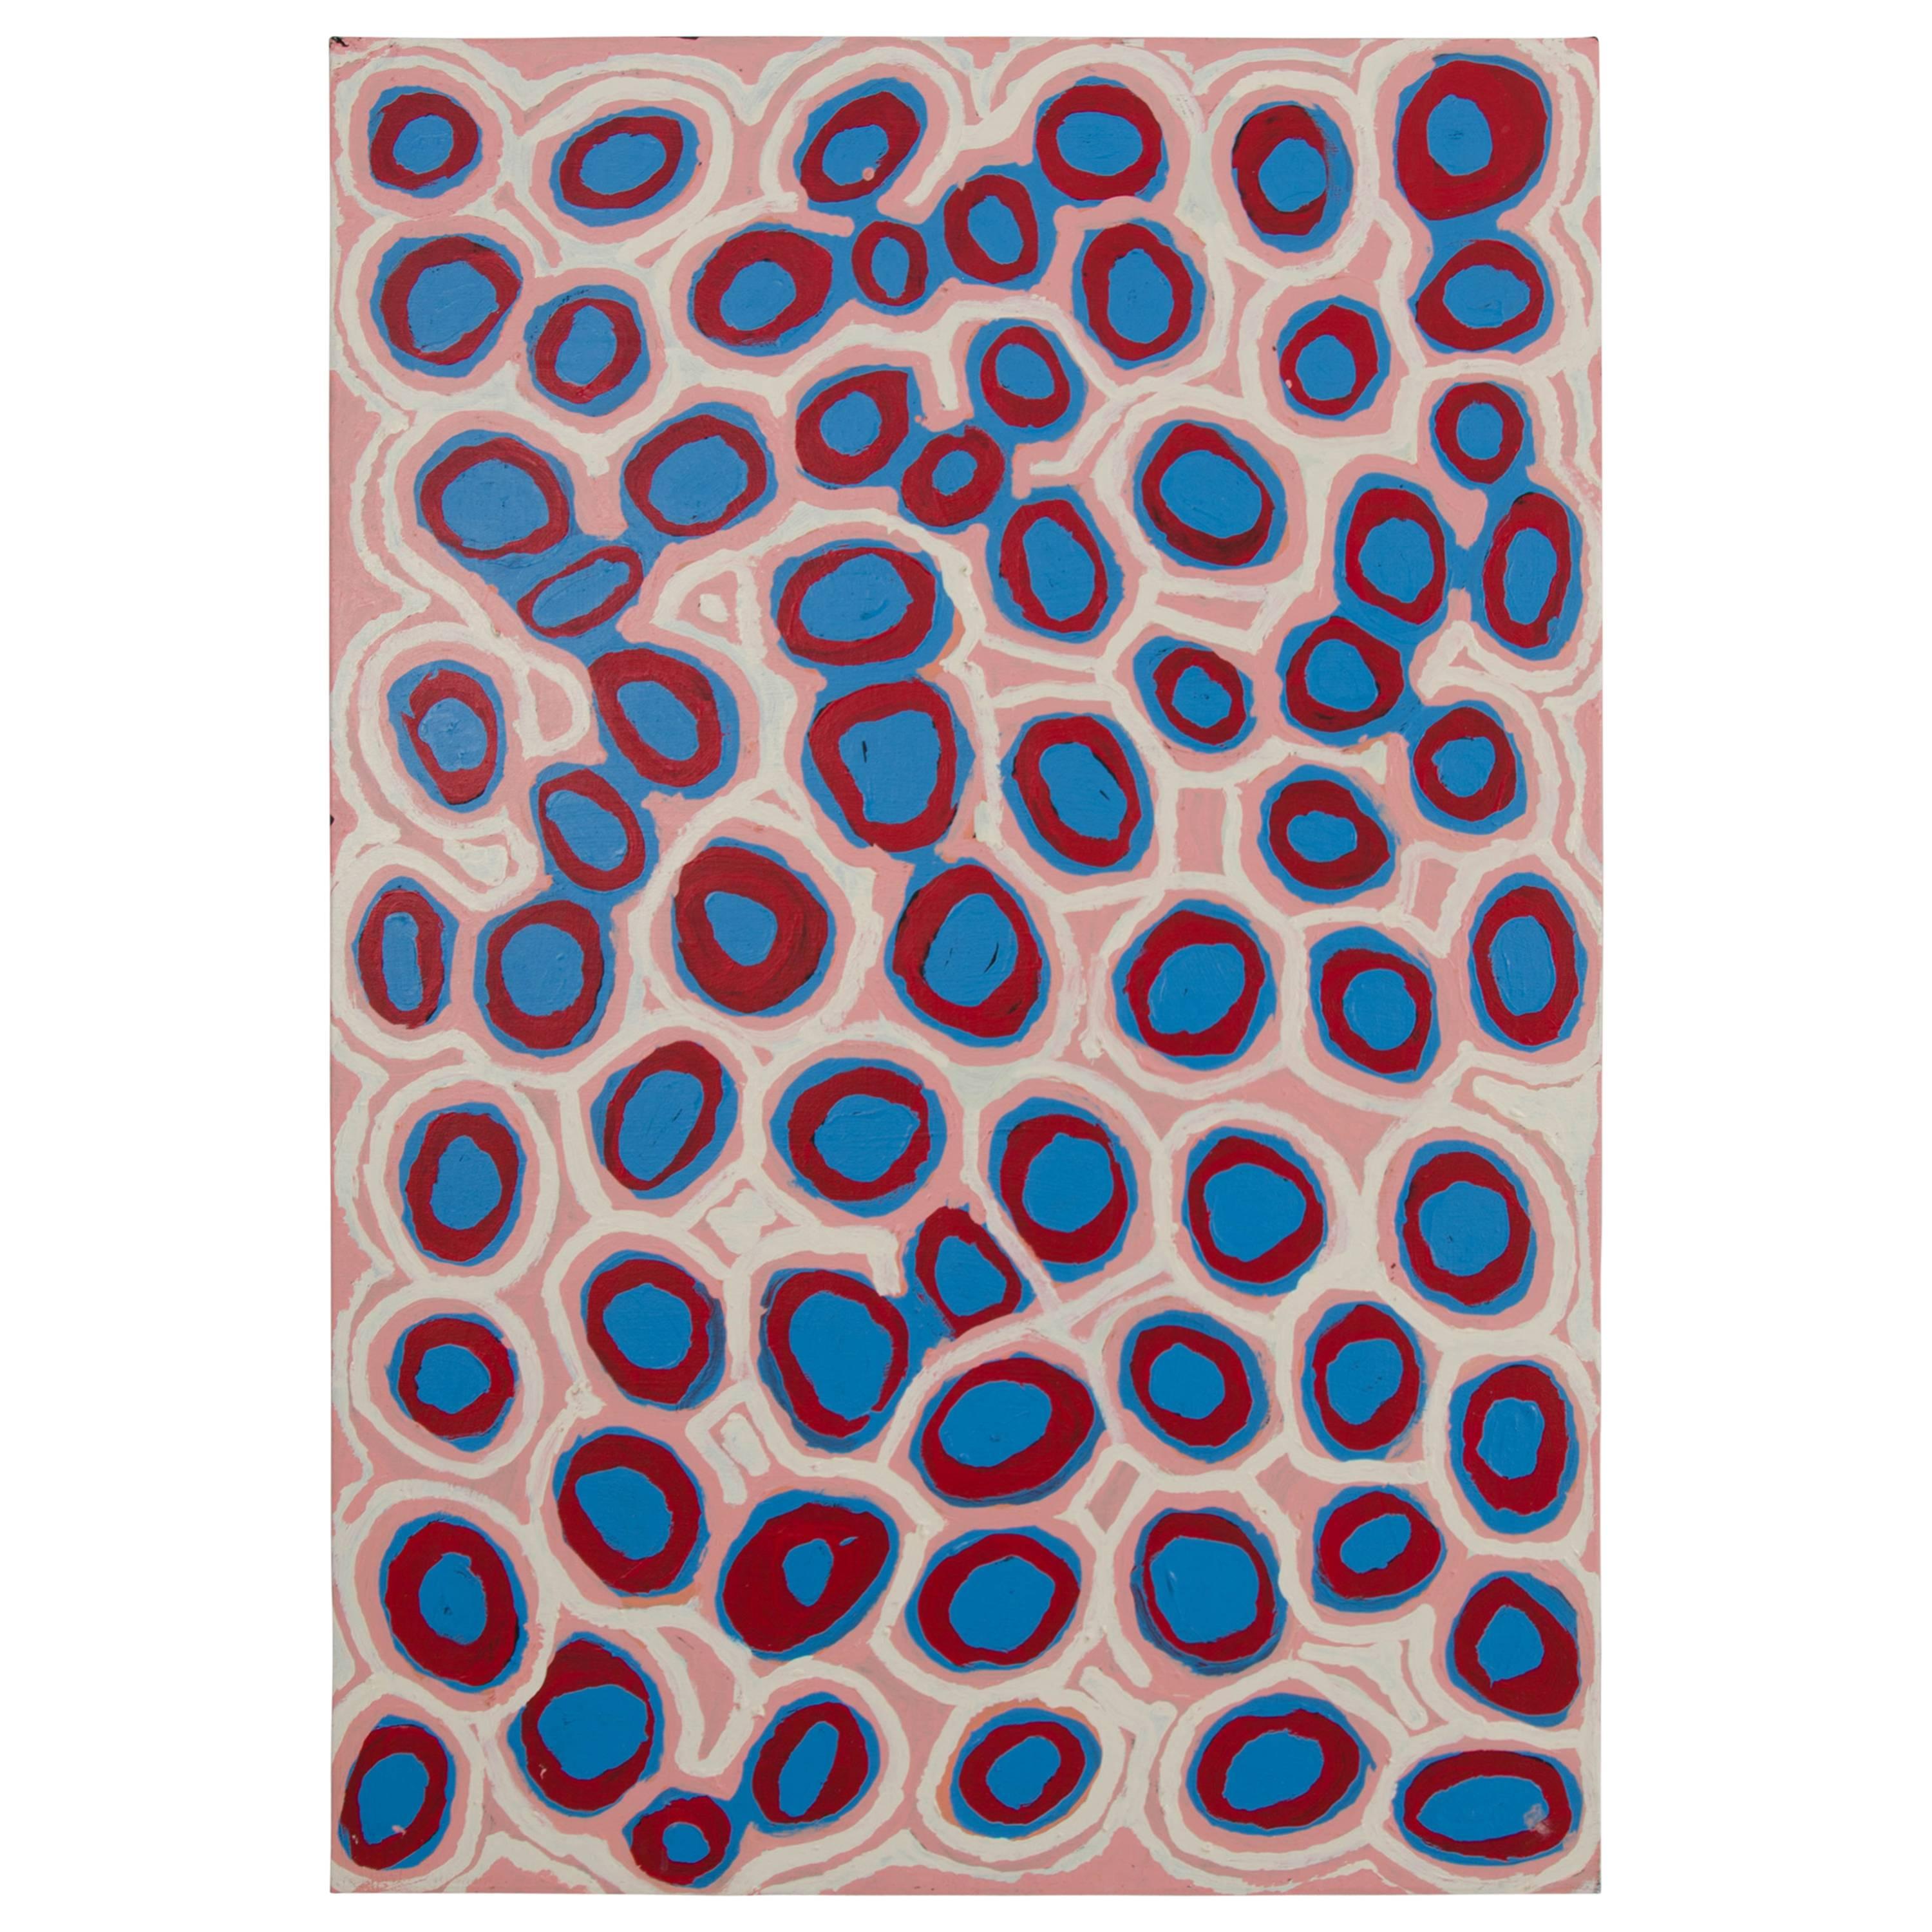 Australian Aboriginal Painting with Pink, Red and Blue by Alice Nampitjinpa For Sale